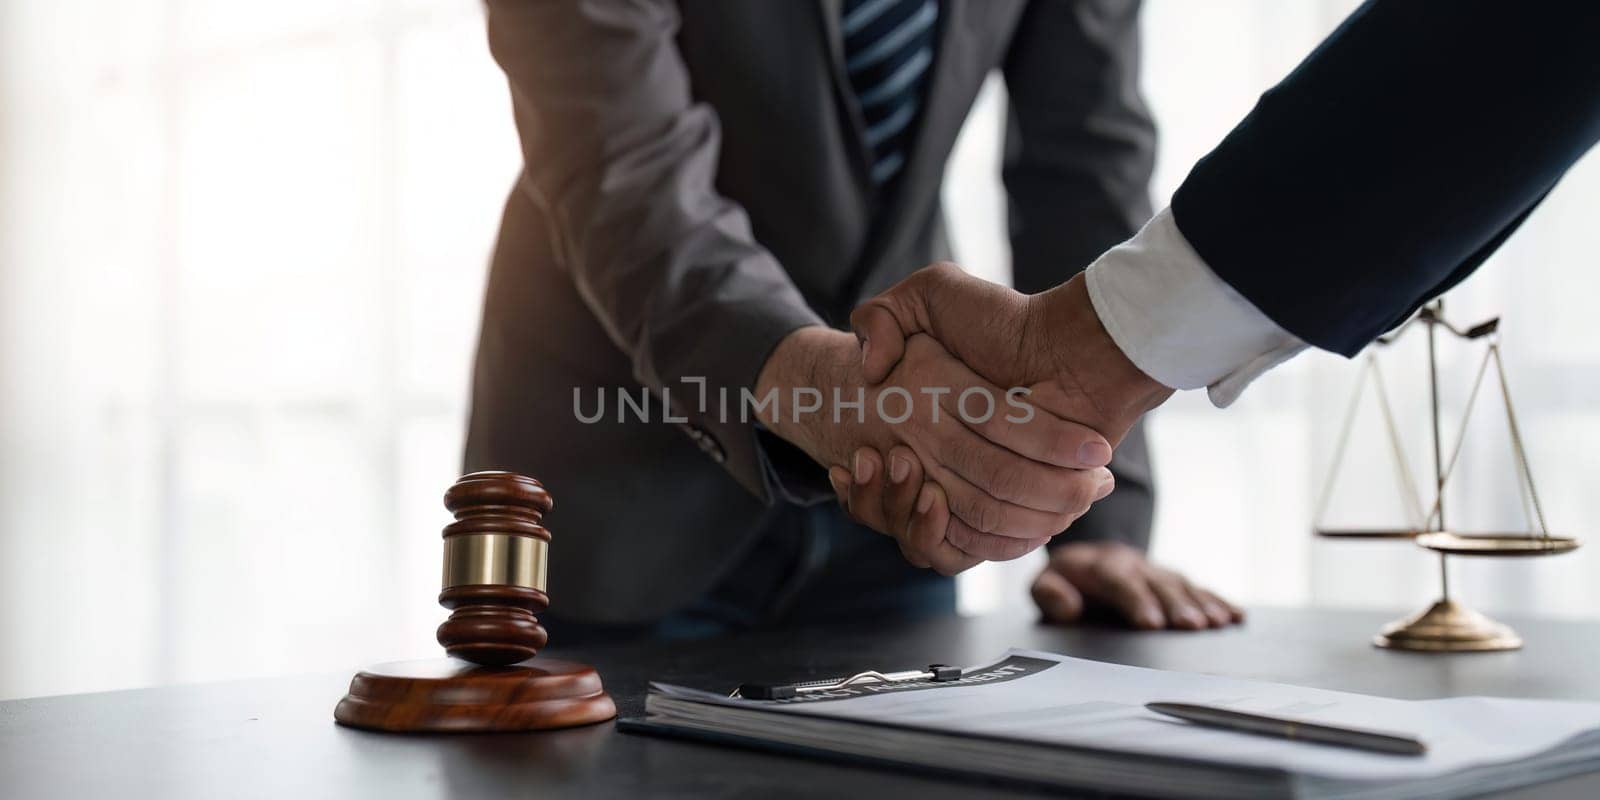 Handshake after cooperation between attorneys lawyer and clients discussing a contract agreement legal fighters, Concepts of law, advice by nateemee